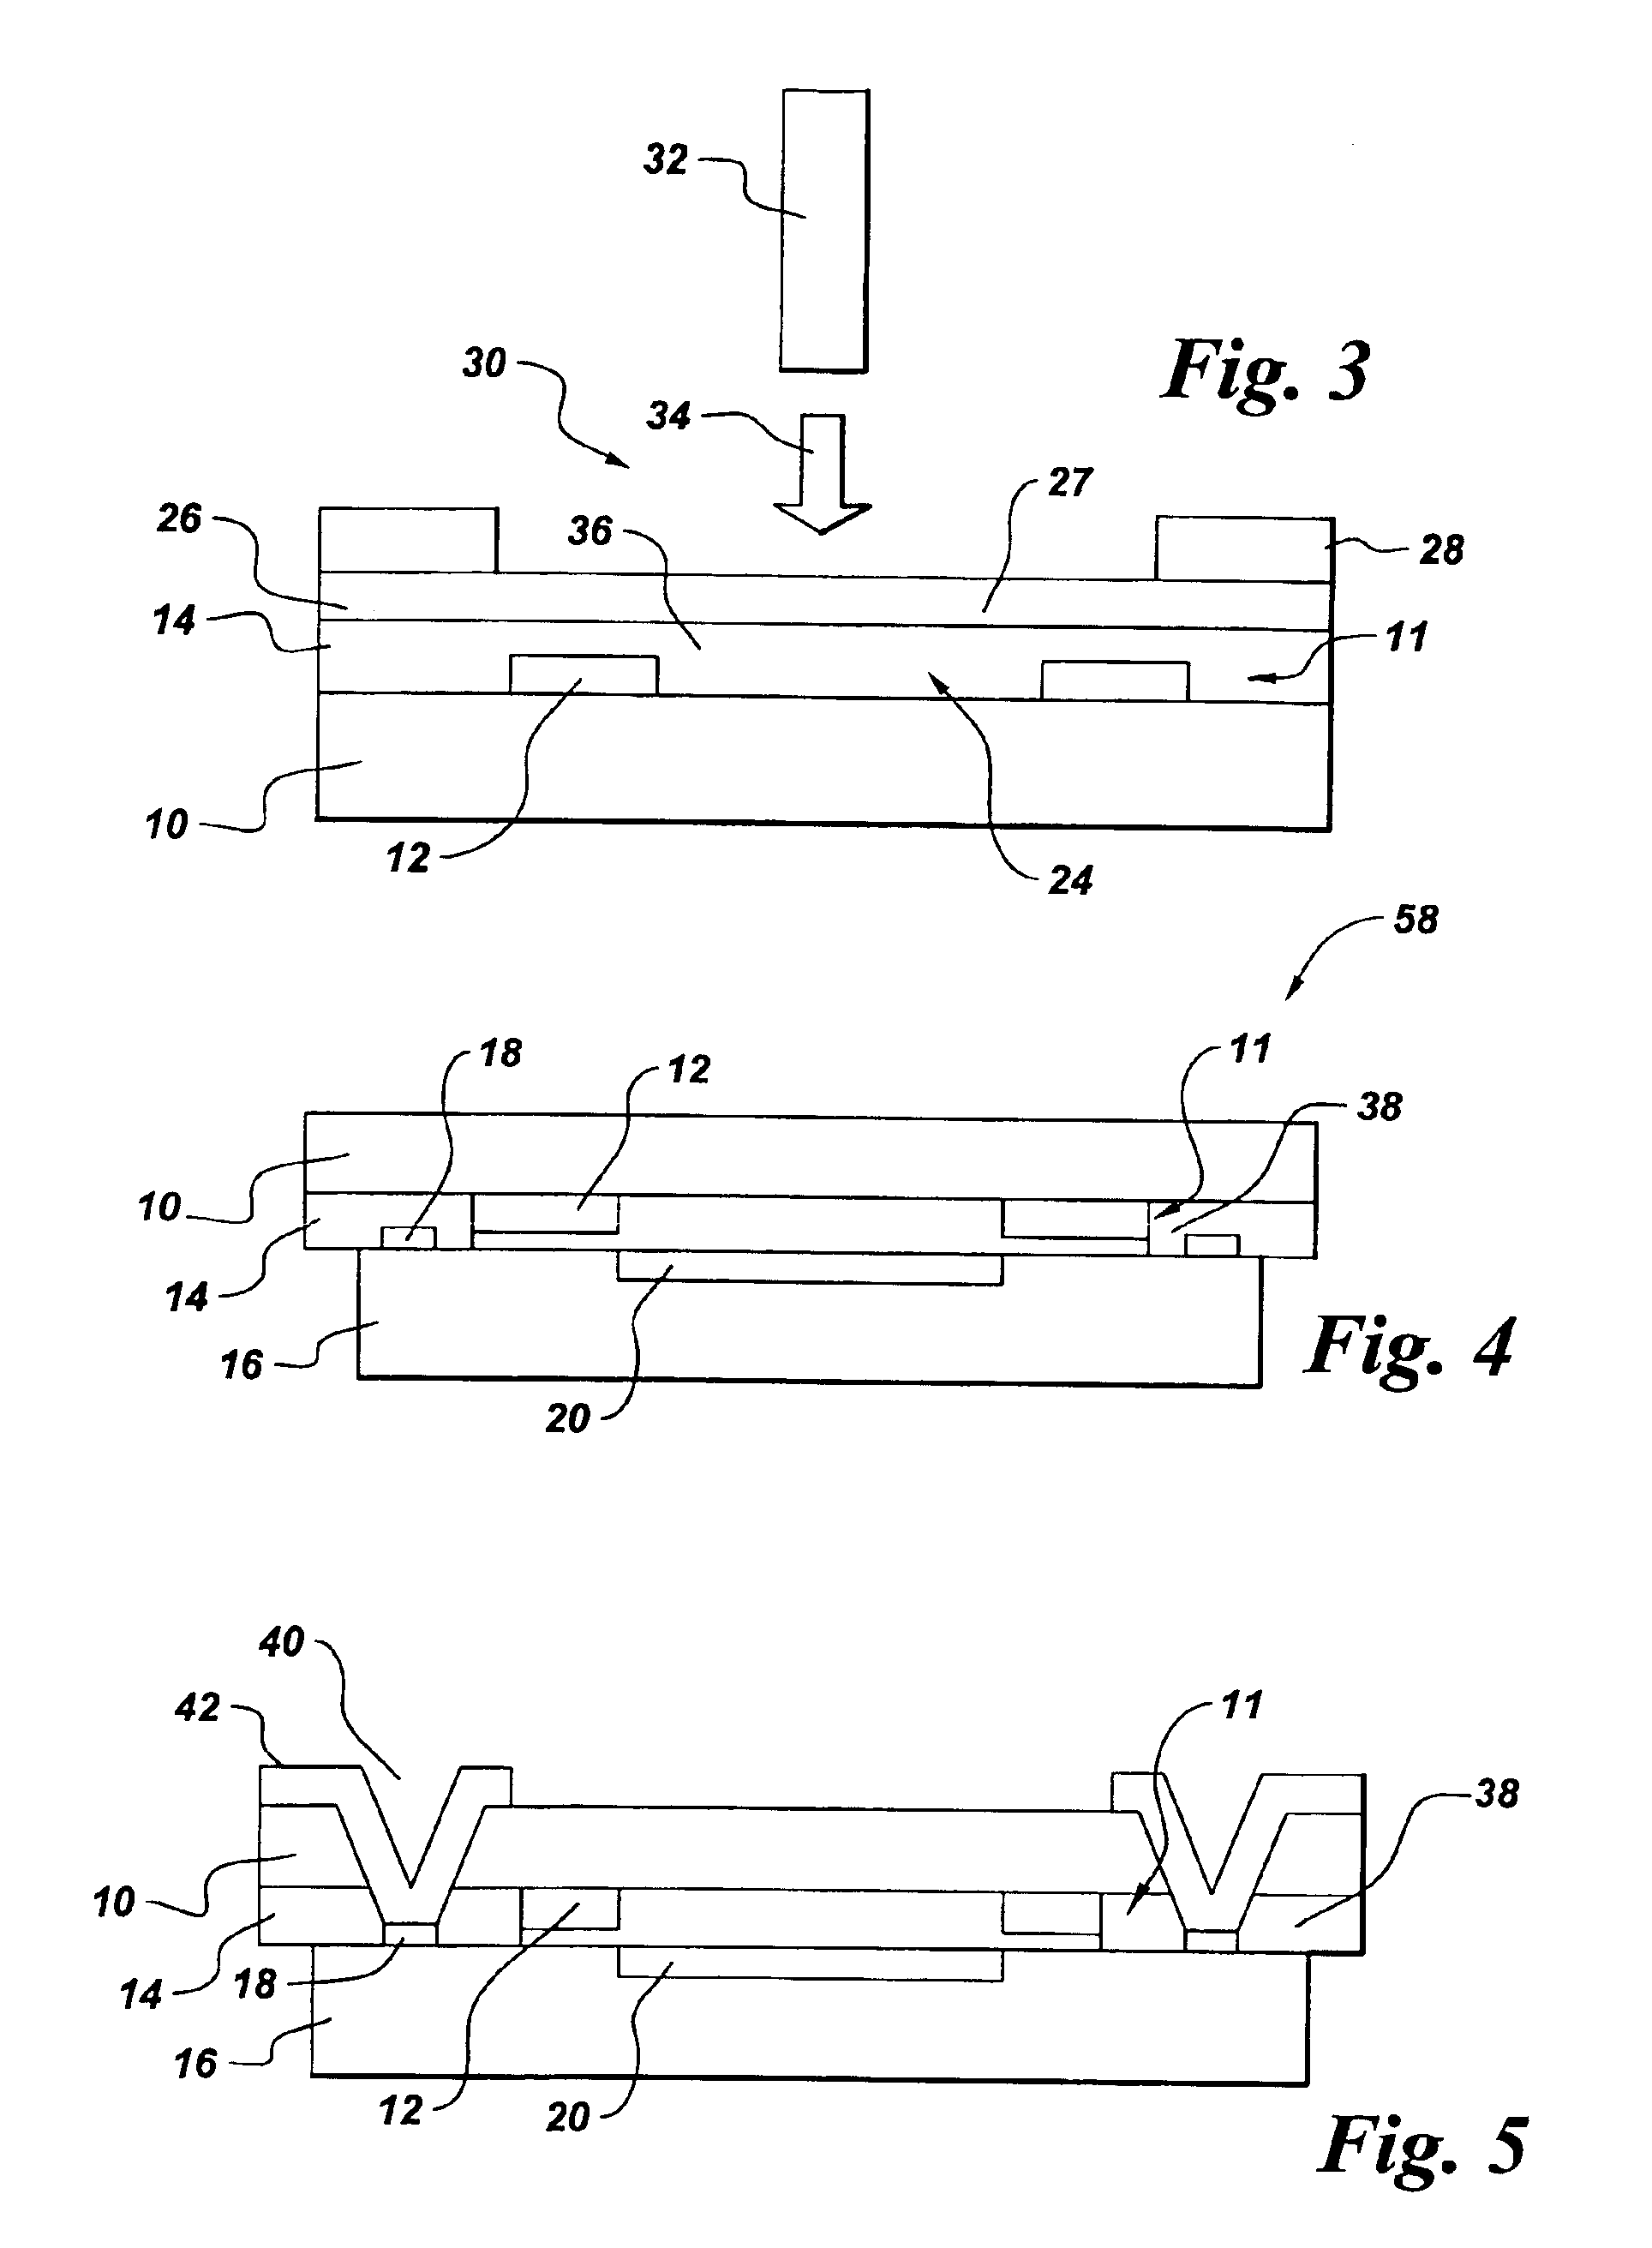 Interconnection structure with etch stop